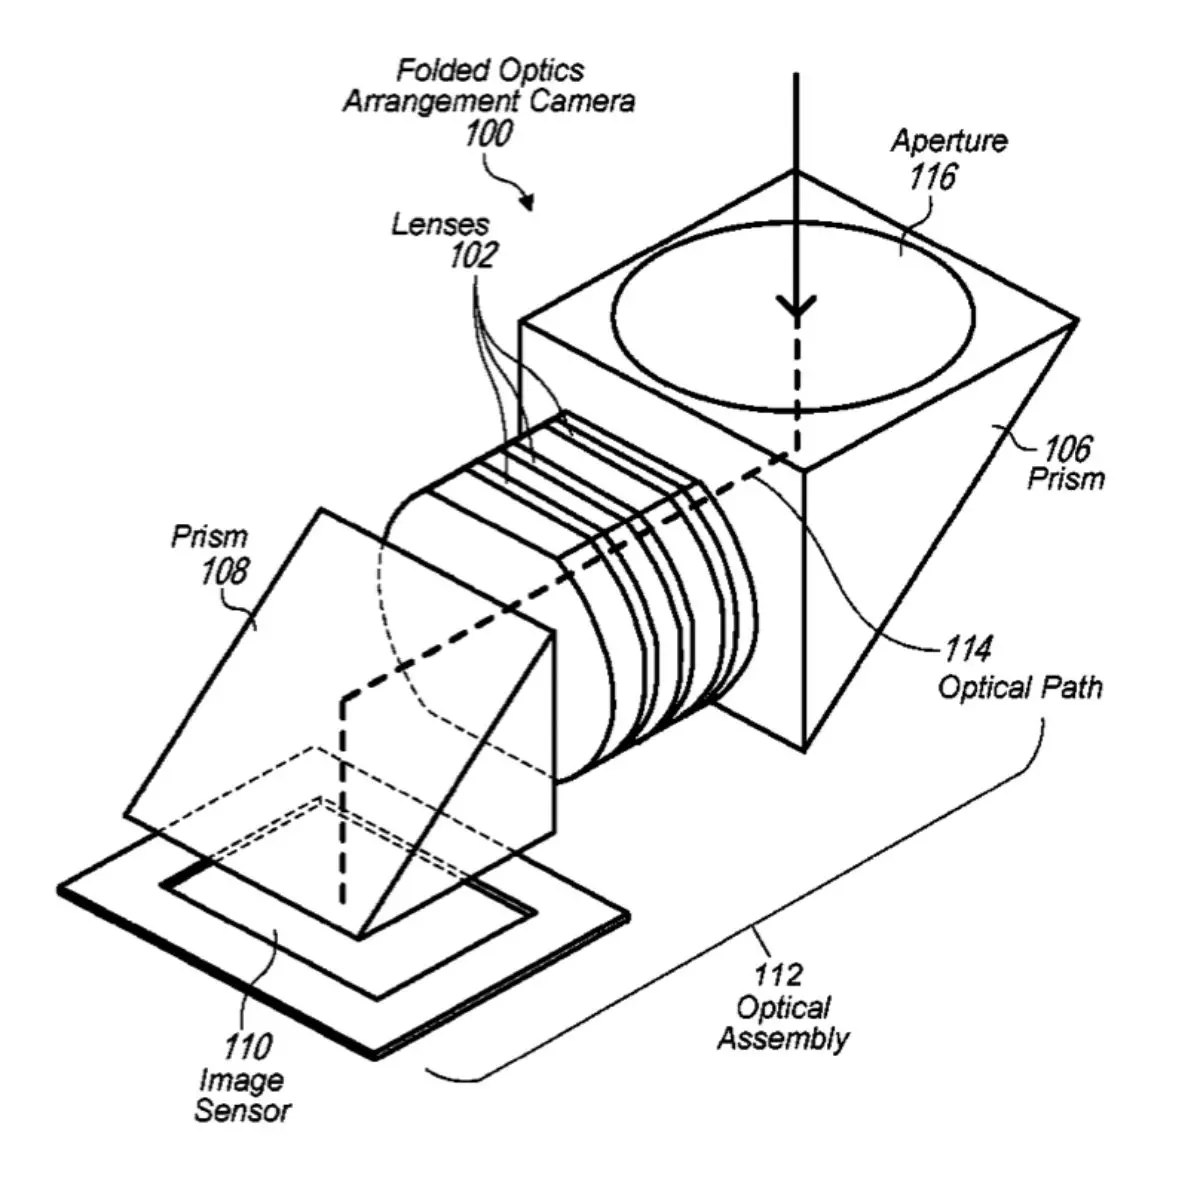 Apple granted patent for a ‘camera focus and stabilization system’